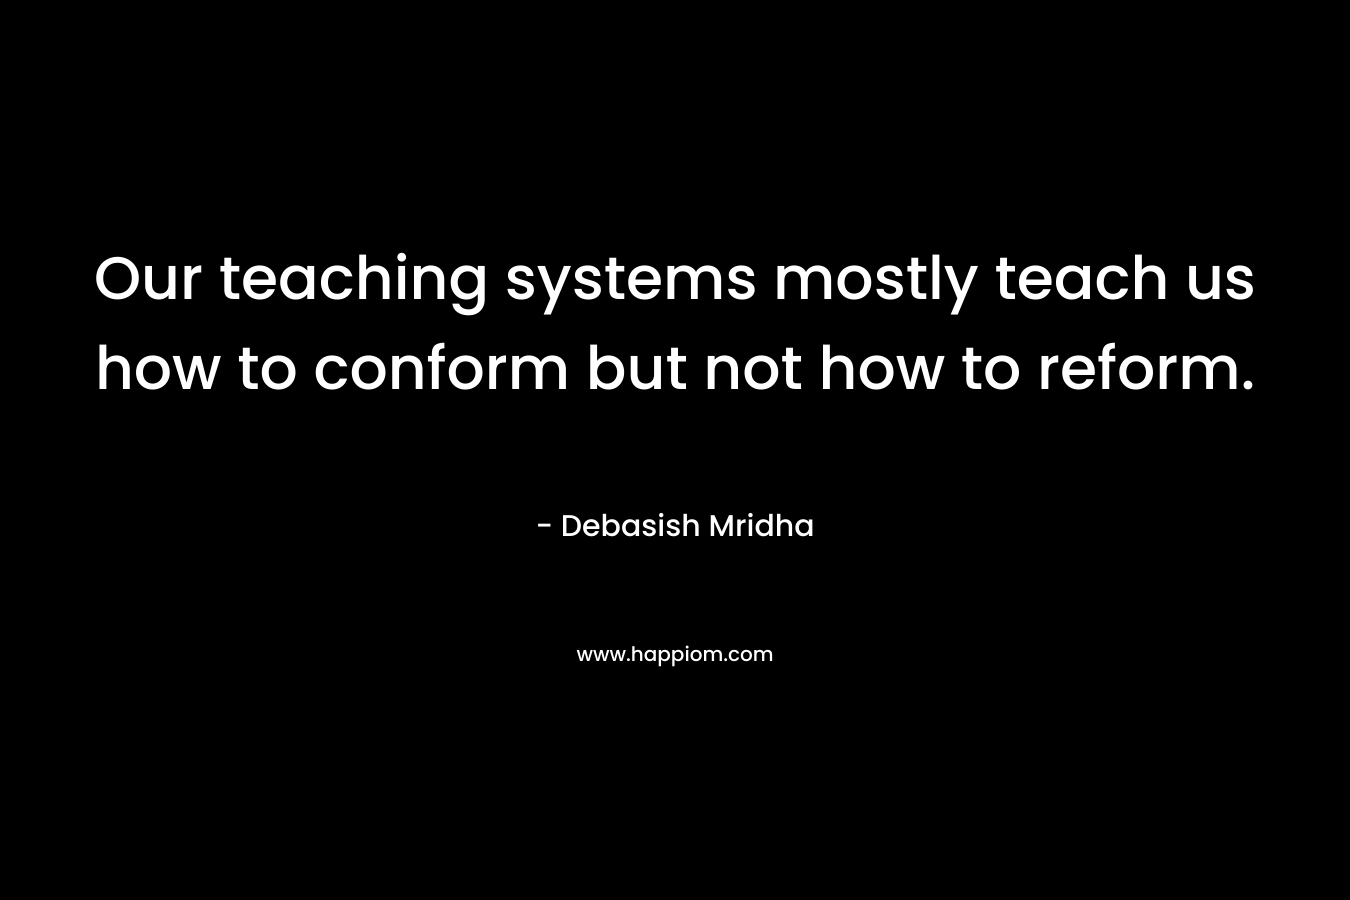 Our teaching systems mostly teach us how to conform but not how to reform.